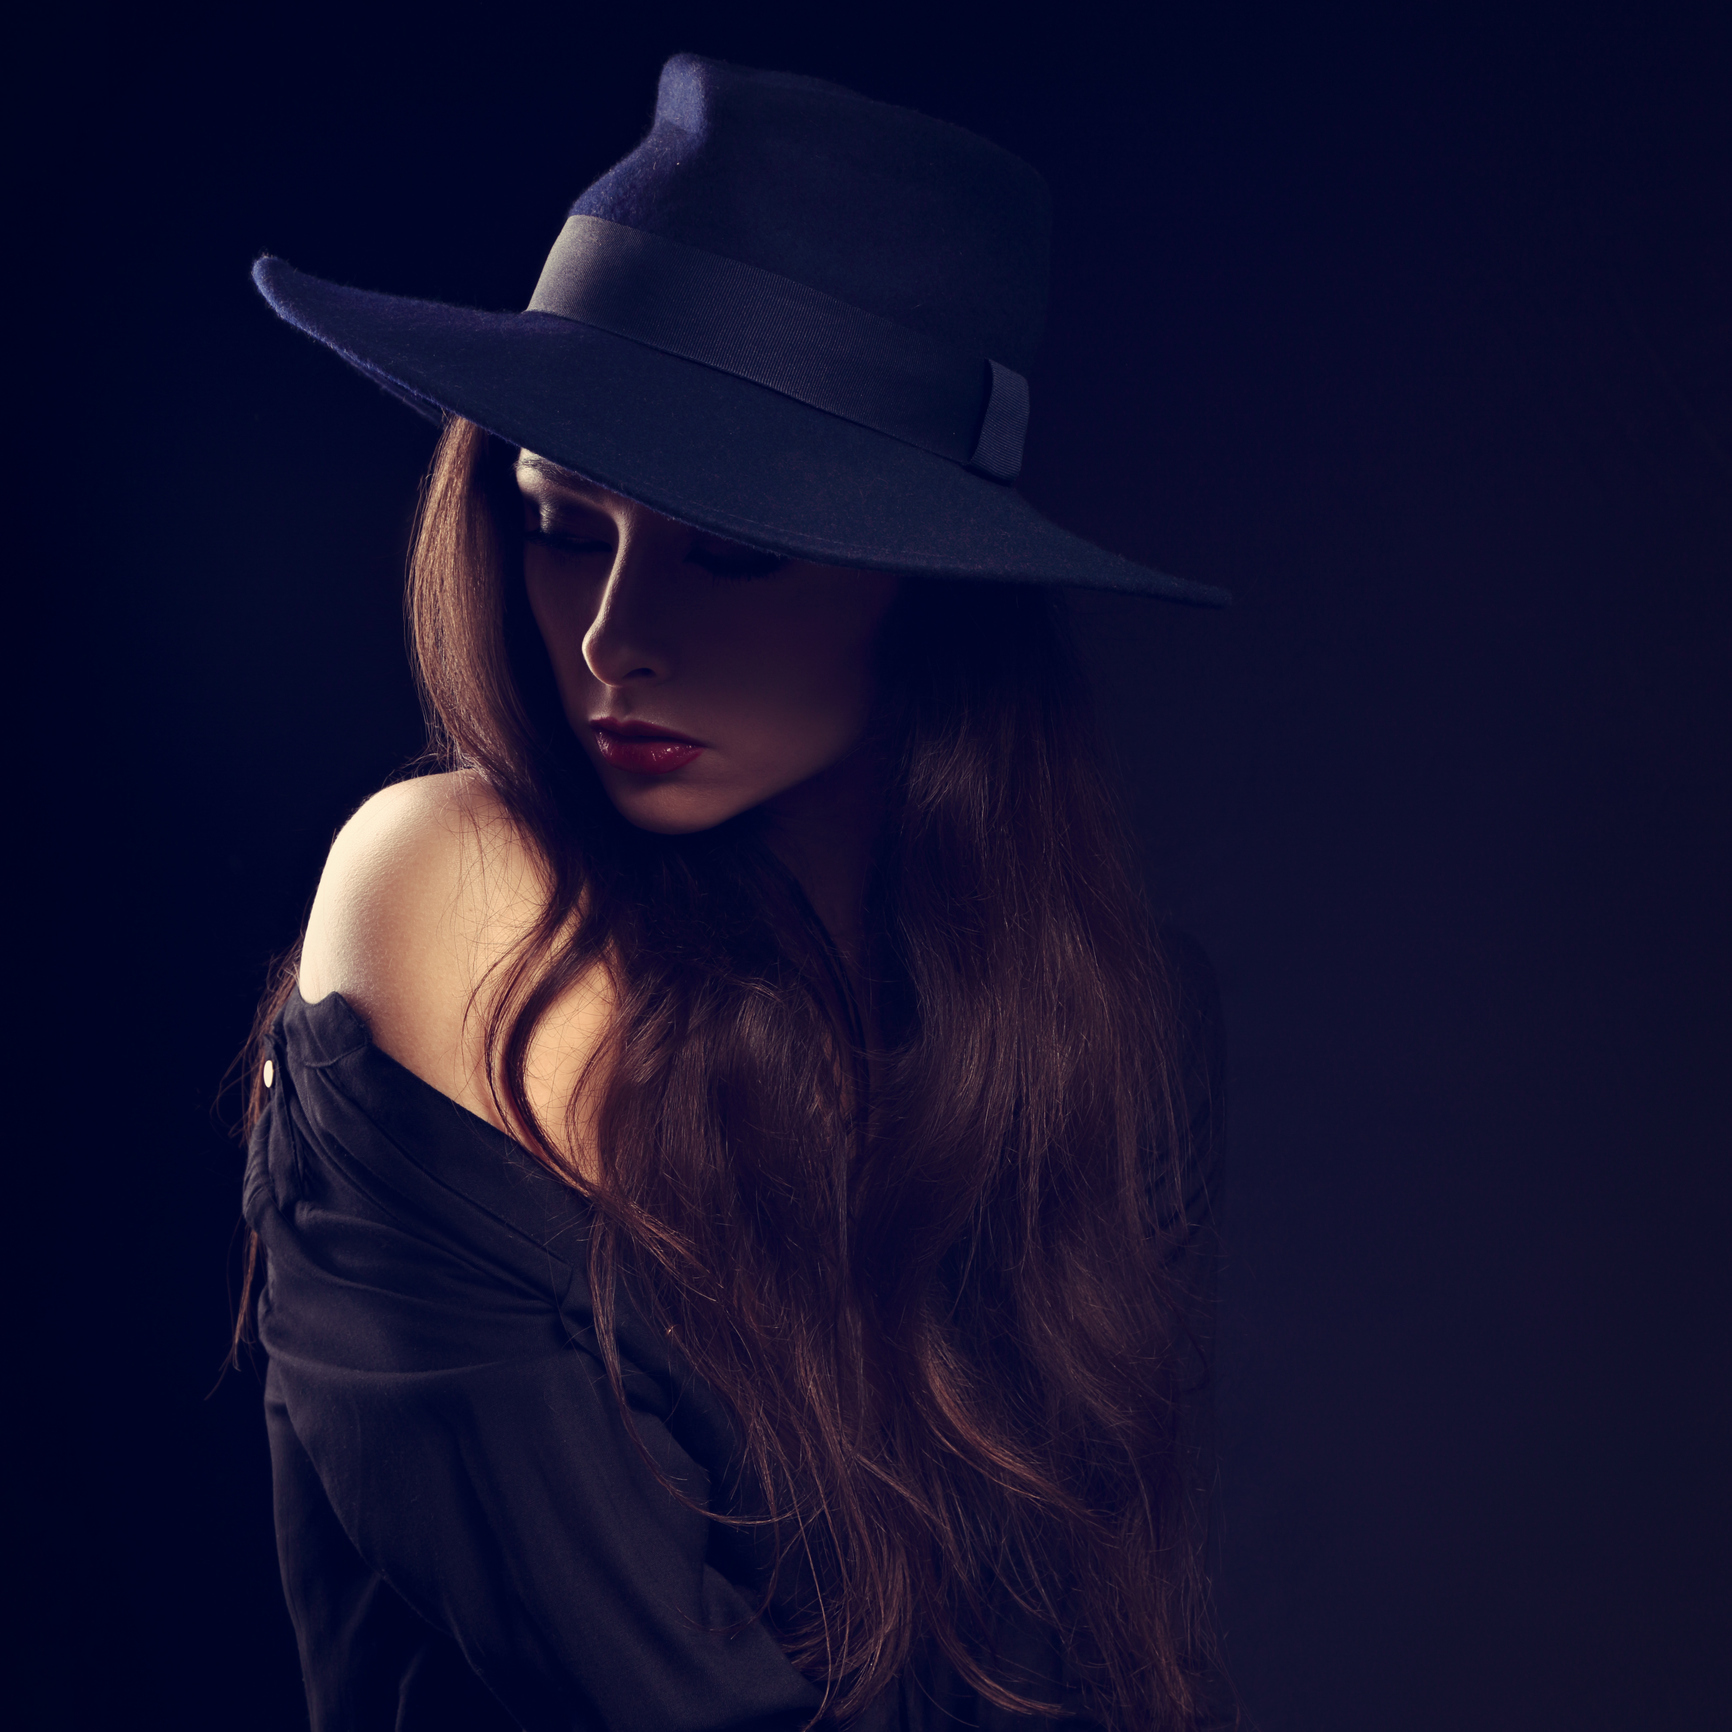 A woman wearing a hat, looking down, while surrounded by darkness.